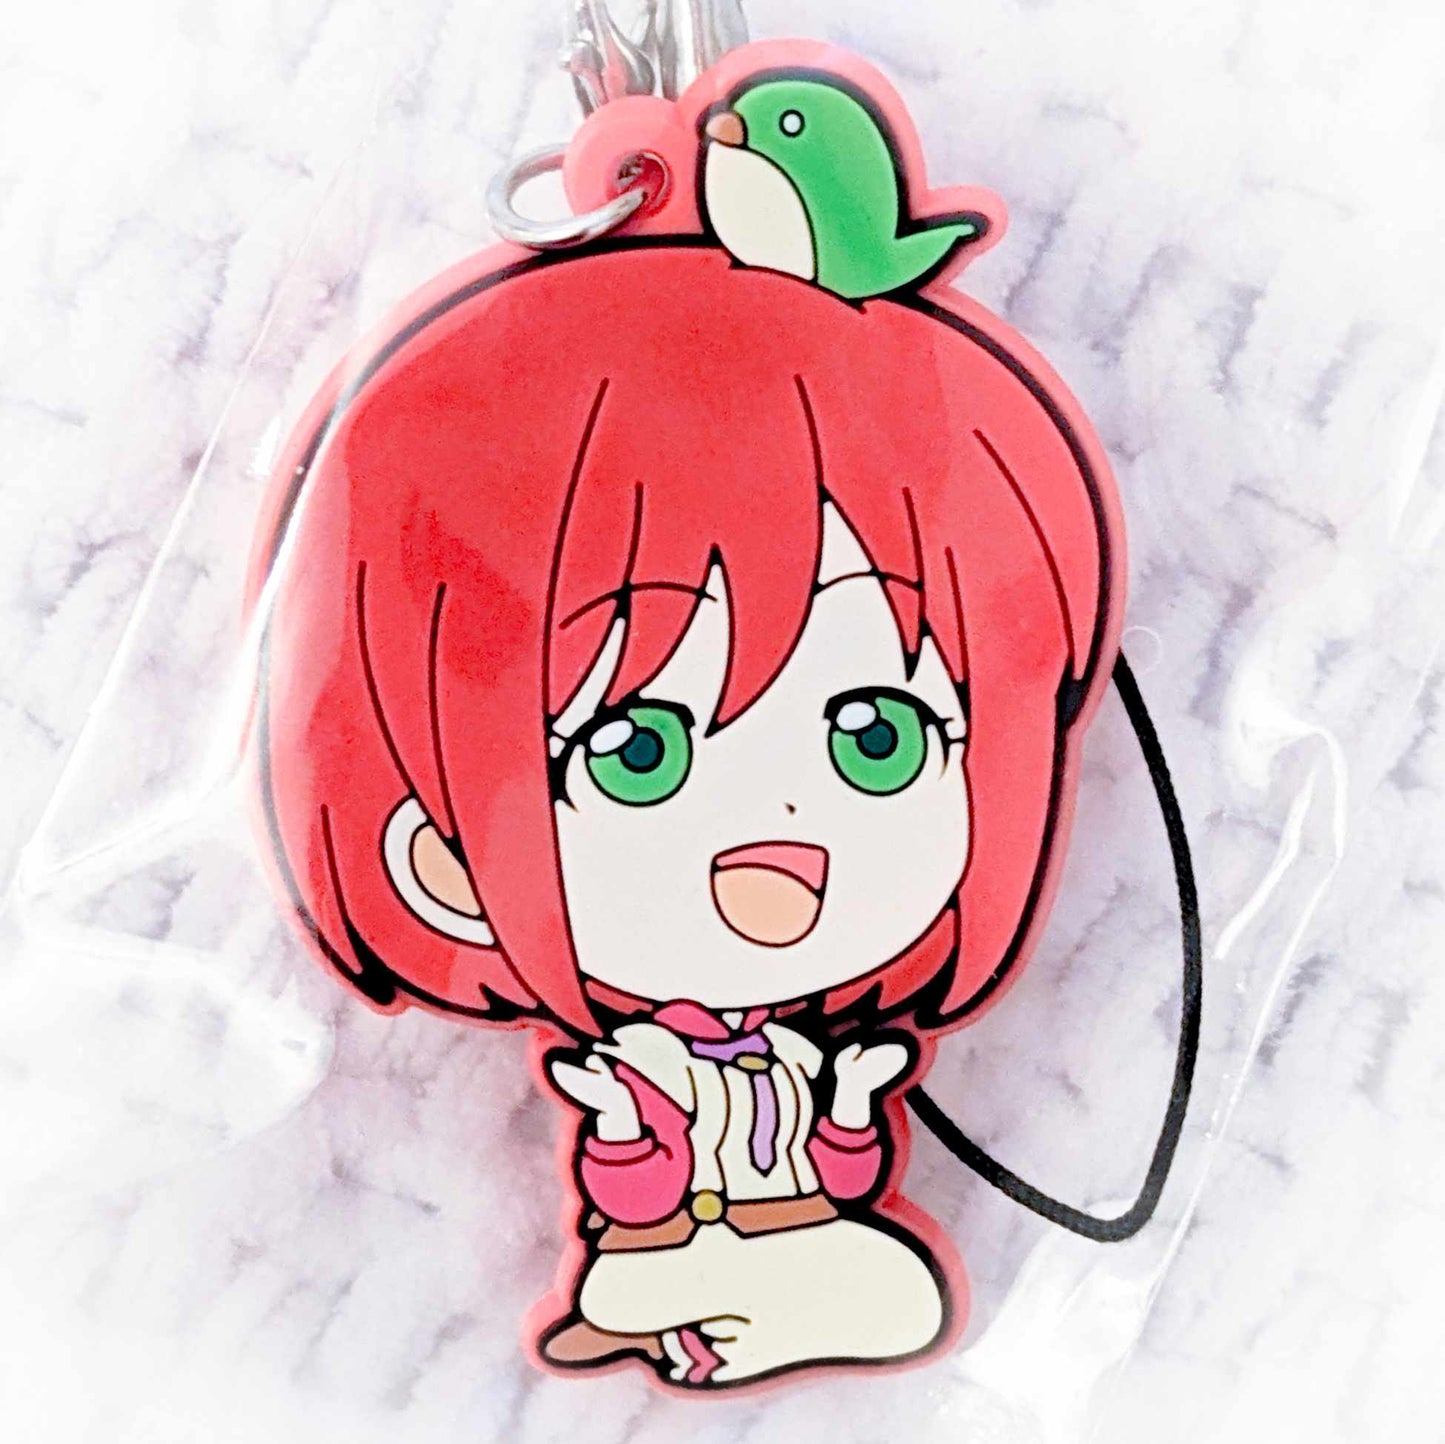 Shirayuki - Snow White With The Red Hair Anime Keychain Rubber Strap